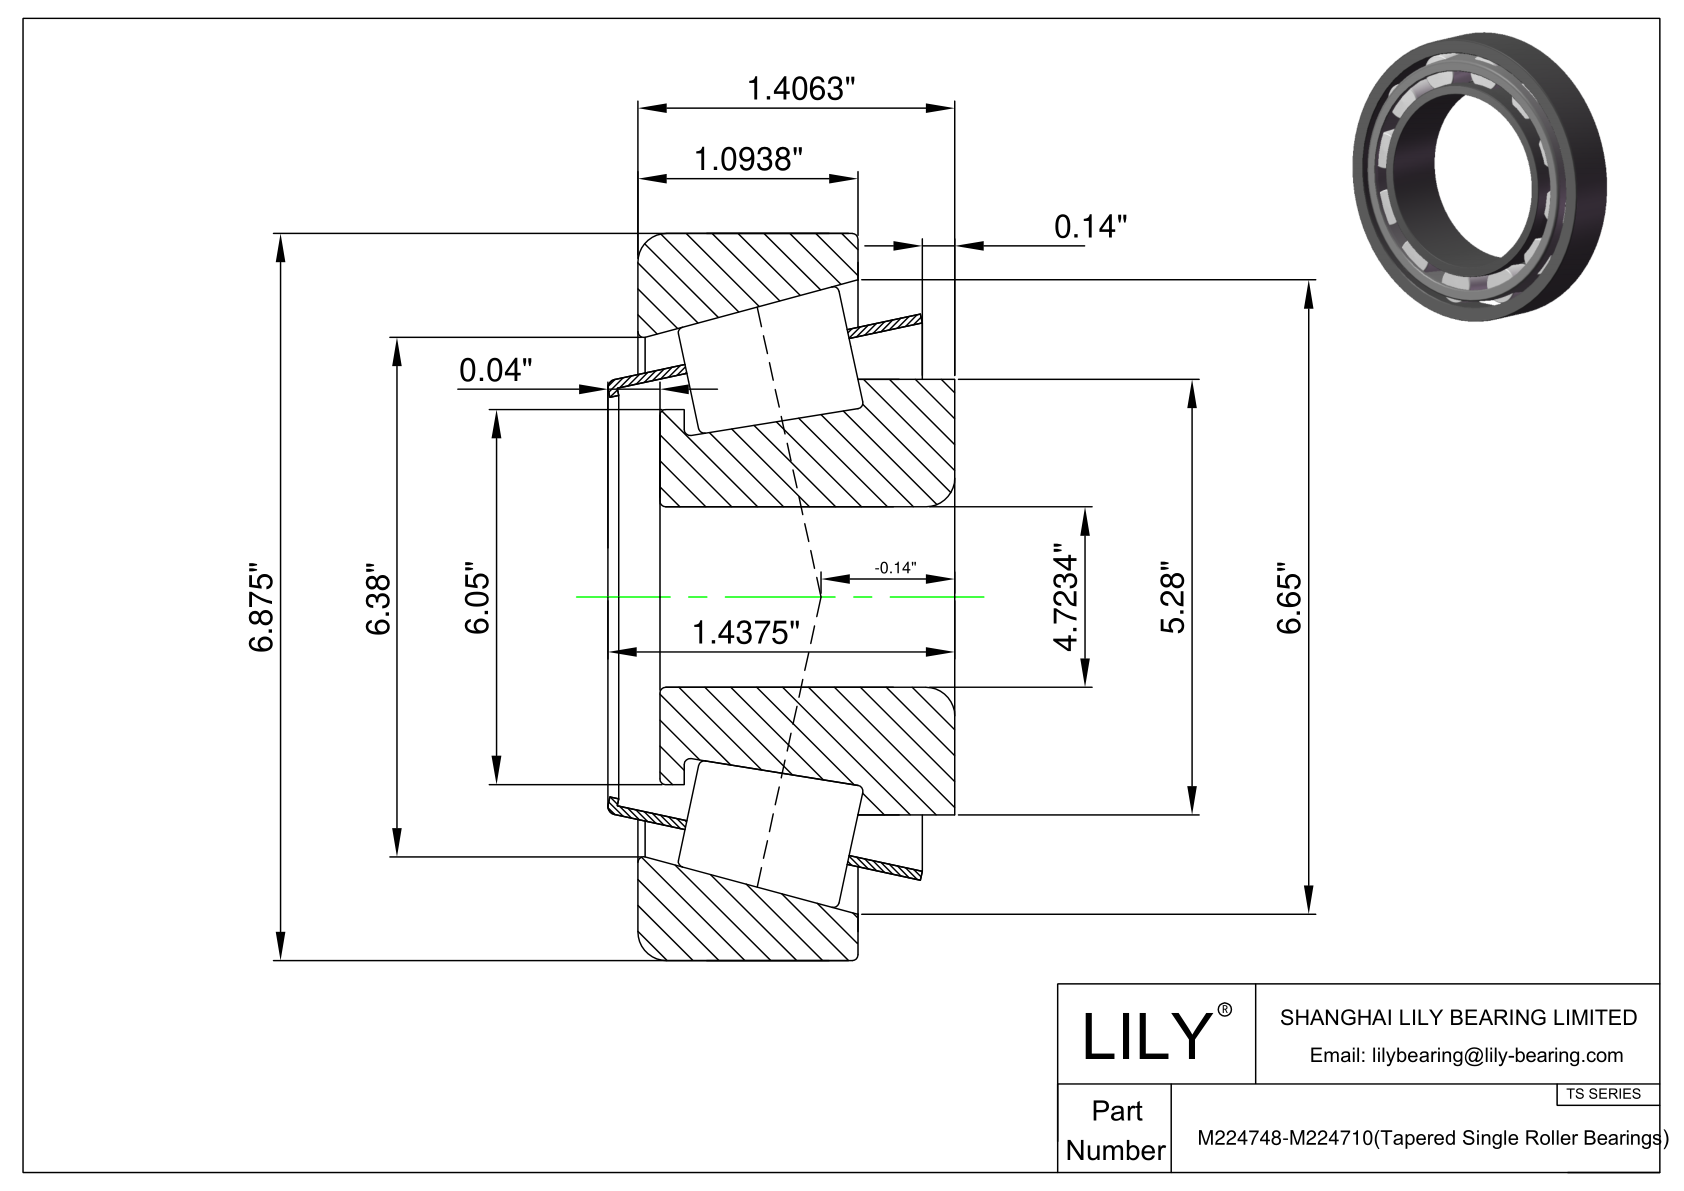 M224748-M224710 TS (Tapered Single Roller Bearings) (Imperial) cad drawing